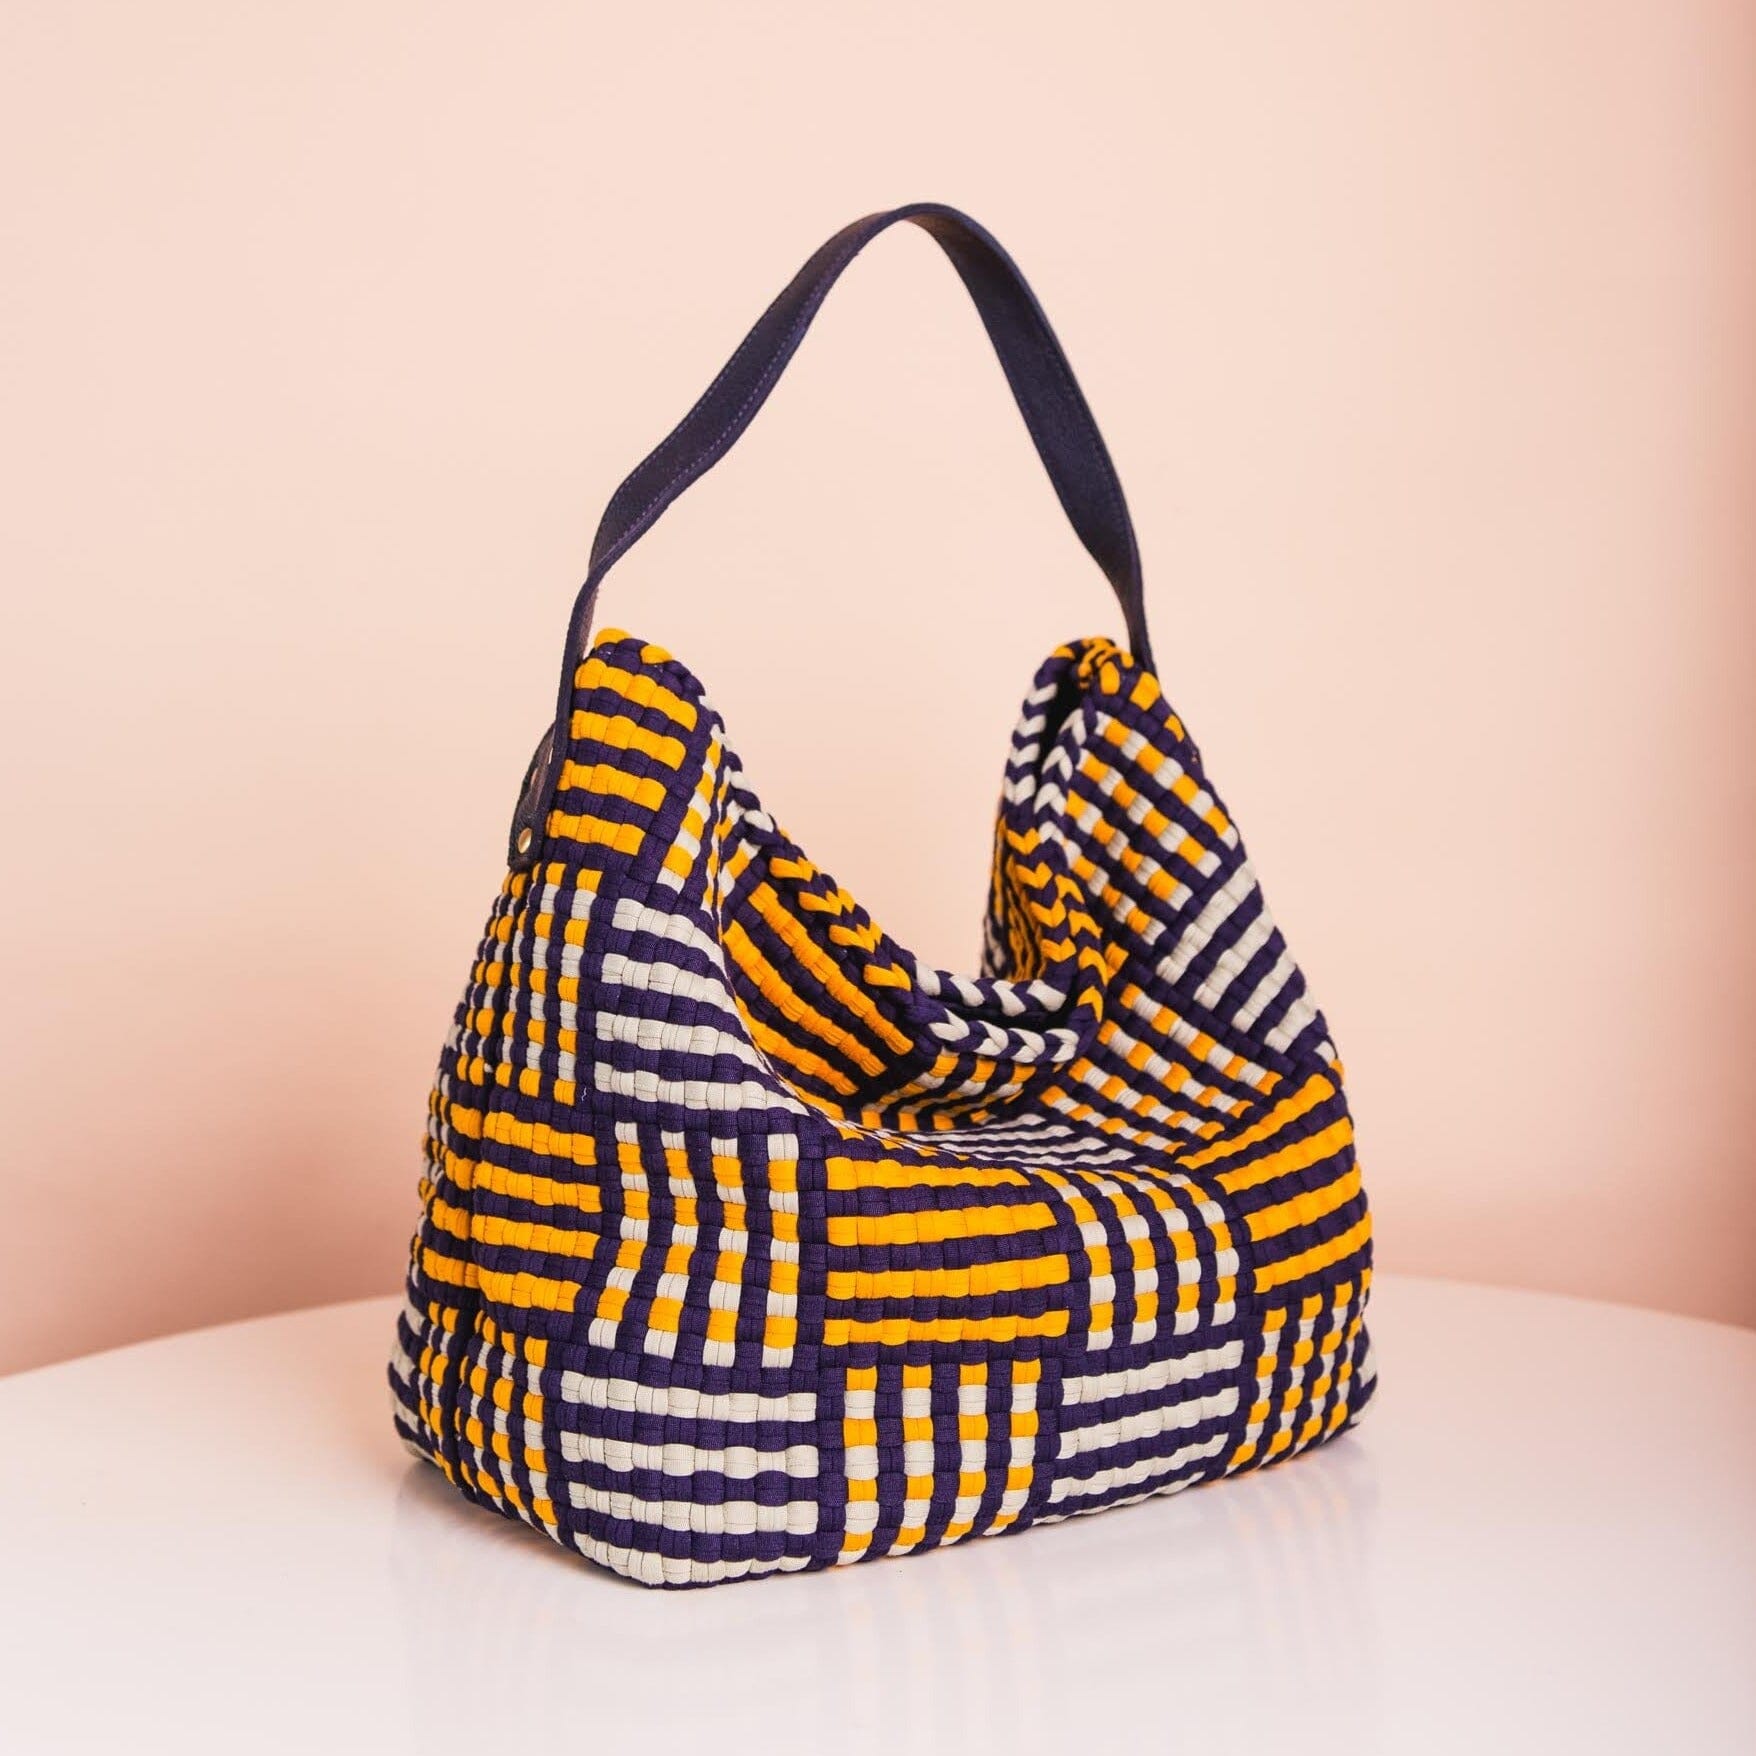 [Ready Today] Buslo Mat Pattern Navy & Yellow Fashion Rags2Riches